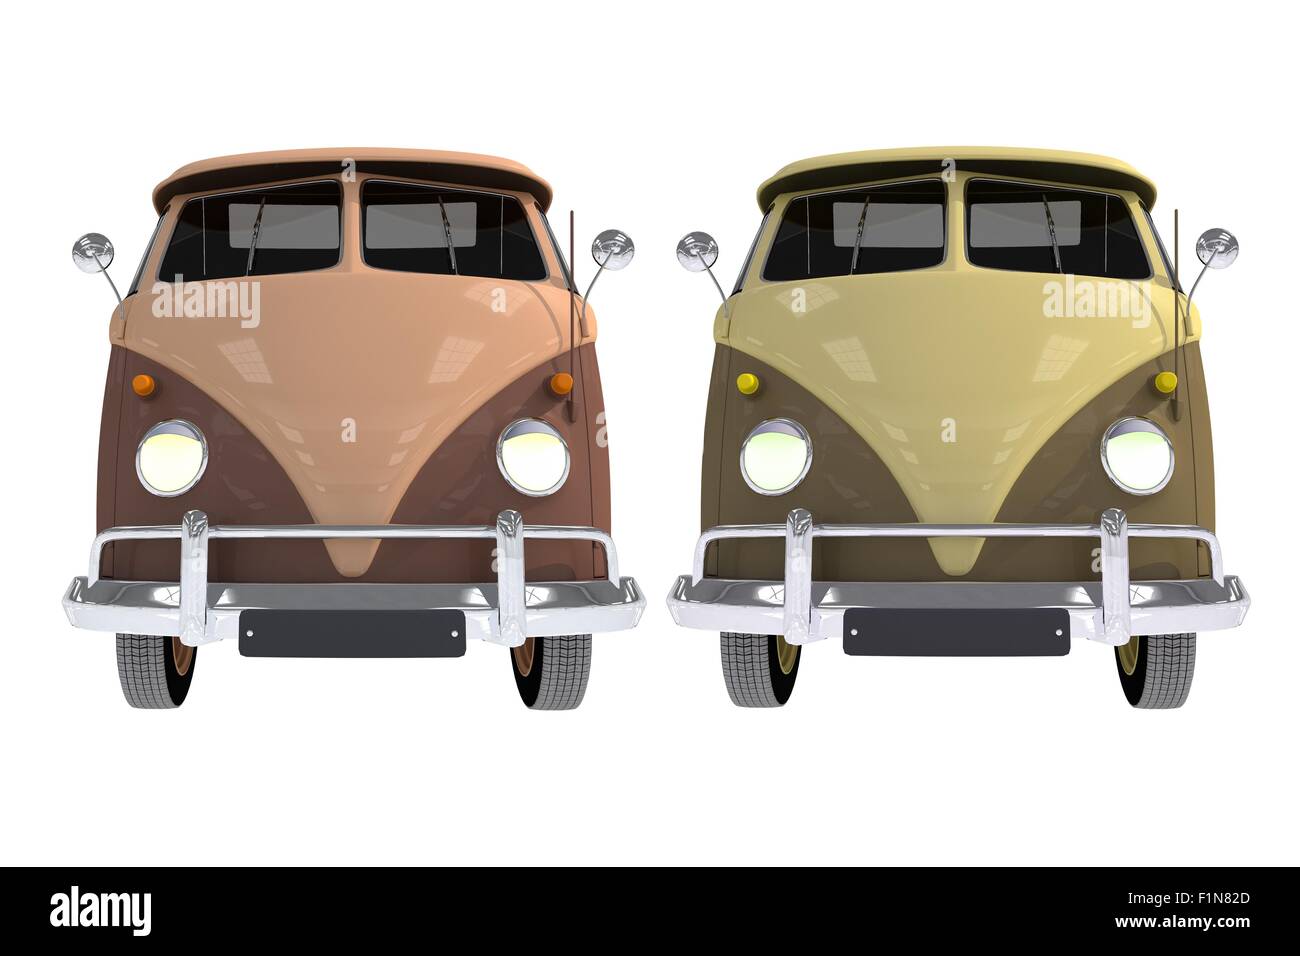 Cool Campers Front View. Vintage Camper Vans Illustration Isolated on White. Stock Photo